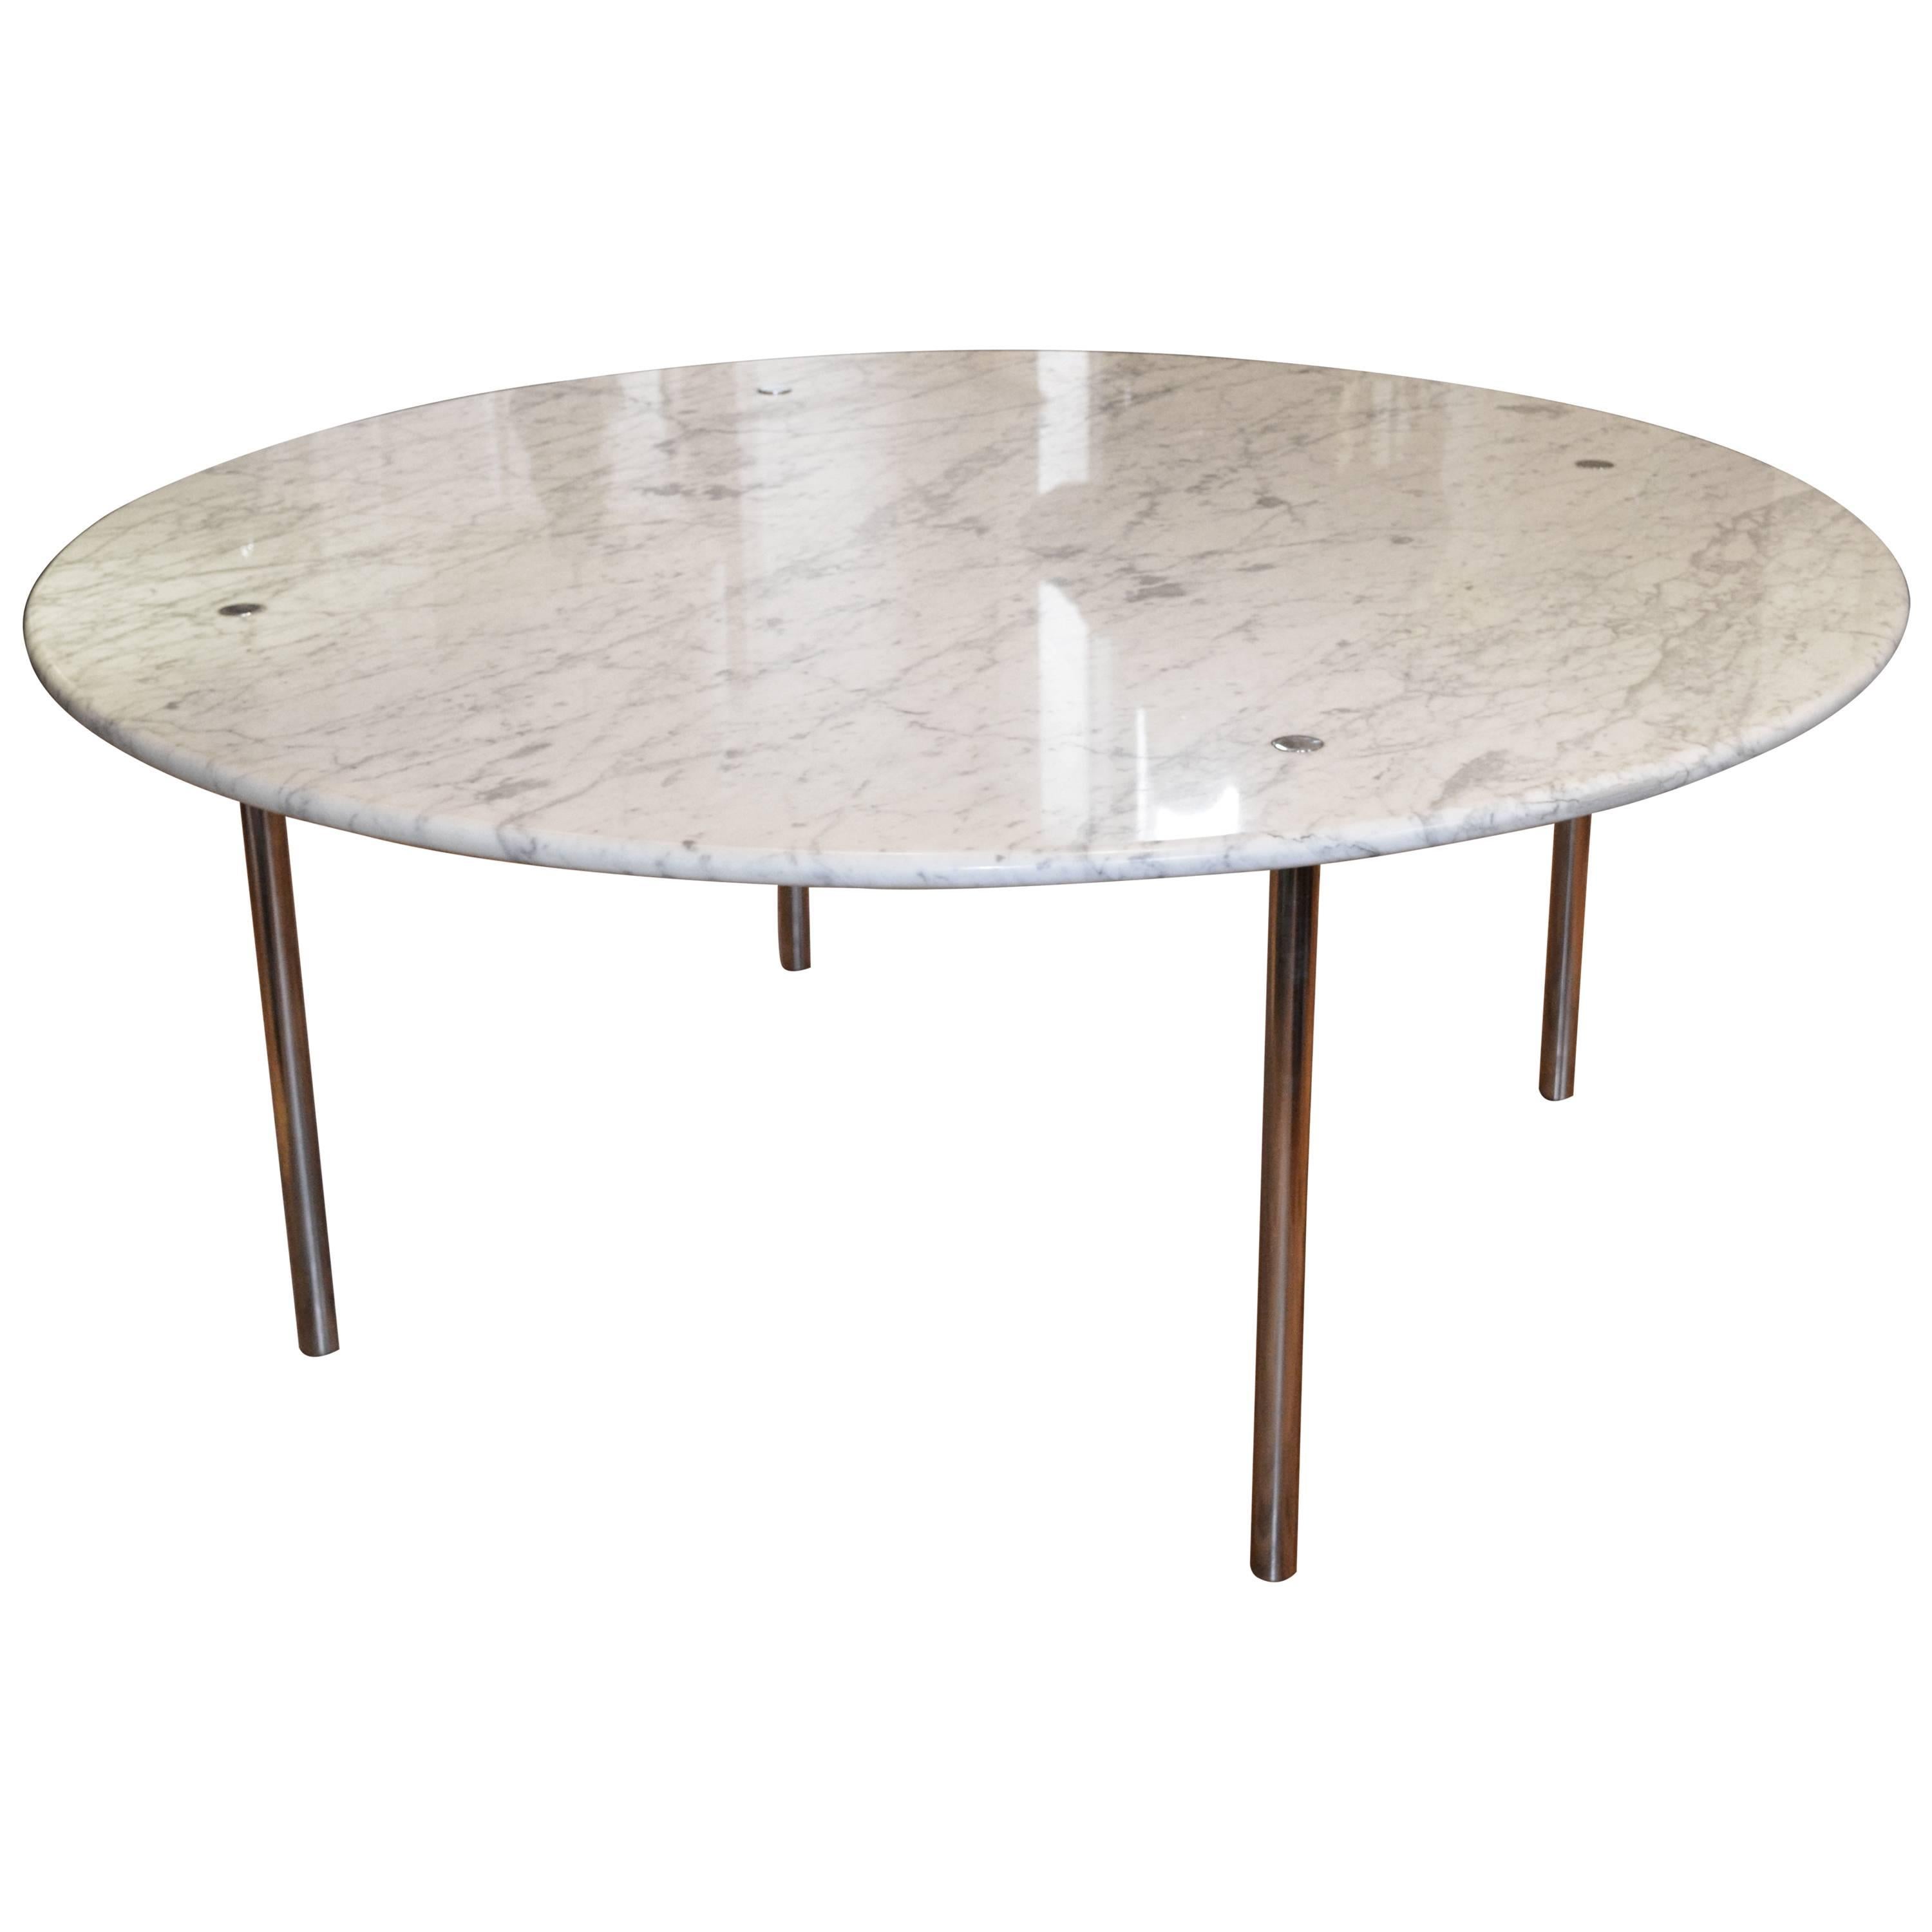 Monumental Round Marble Dining Table by Katavolos, Littell & Kelly for Laverne